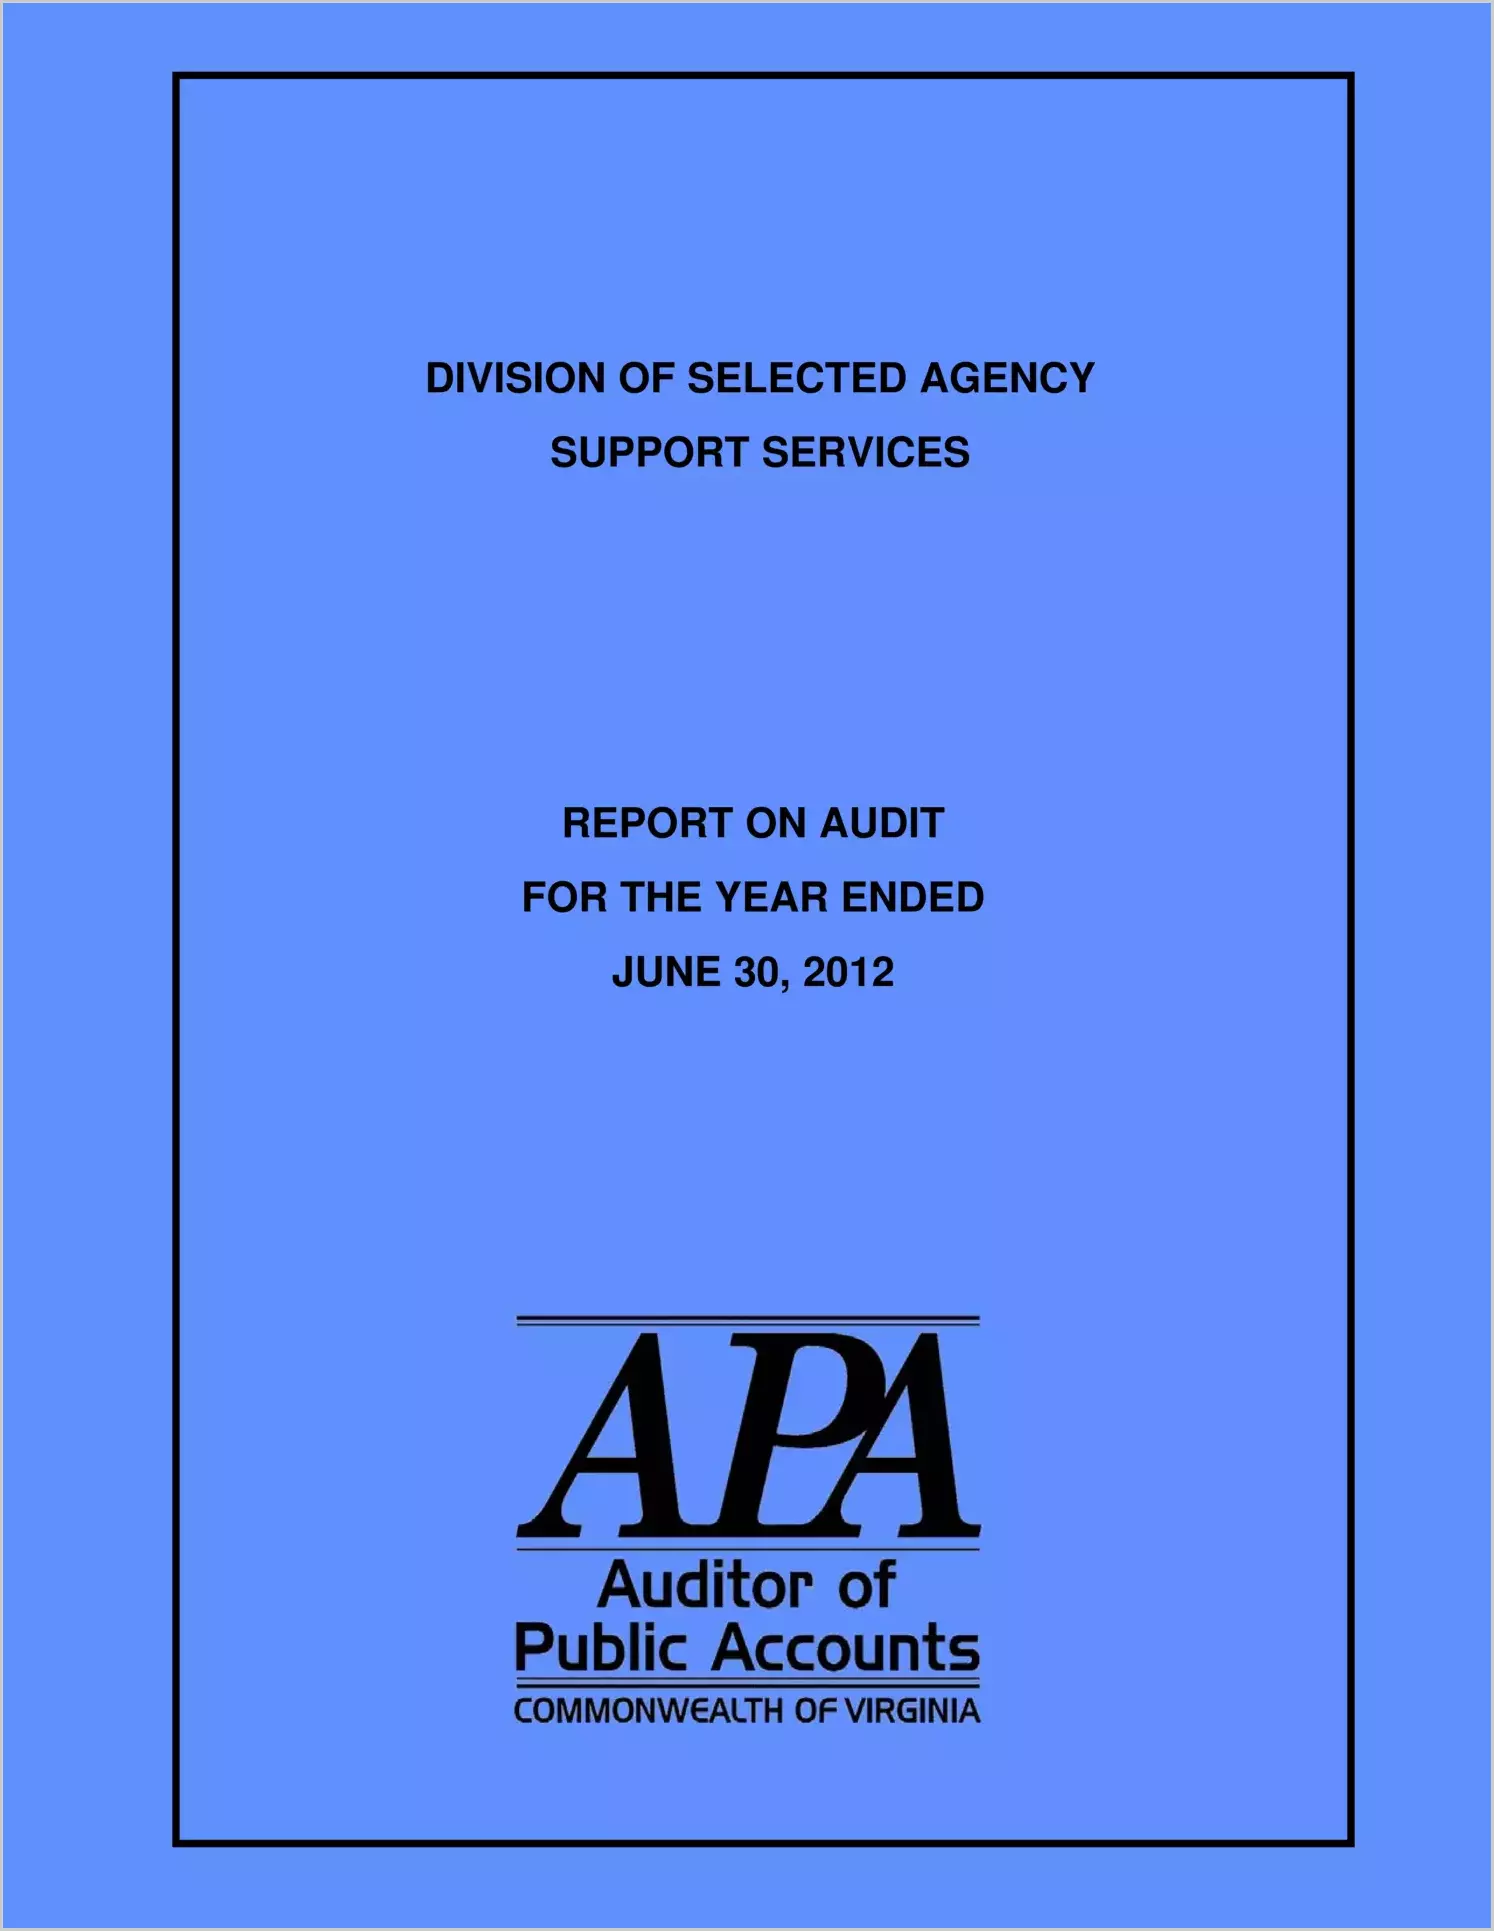 Division of Selected Agency Support Services for the year ended June 30, 2012